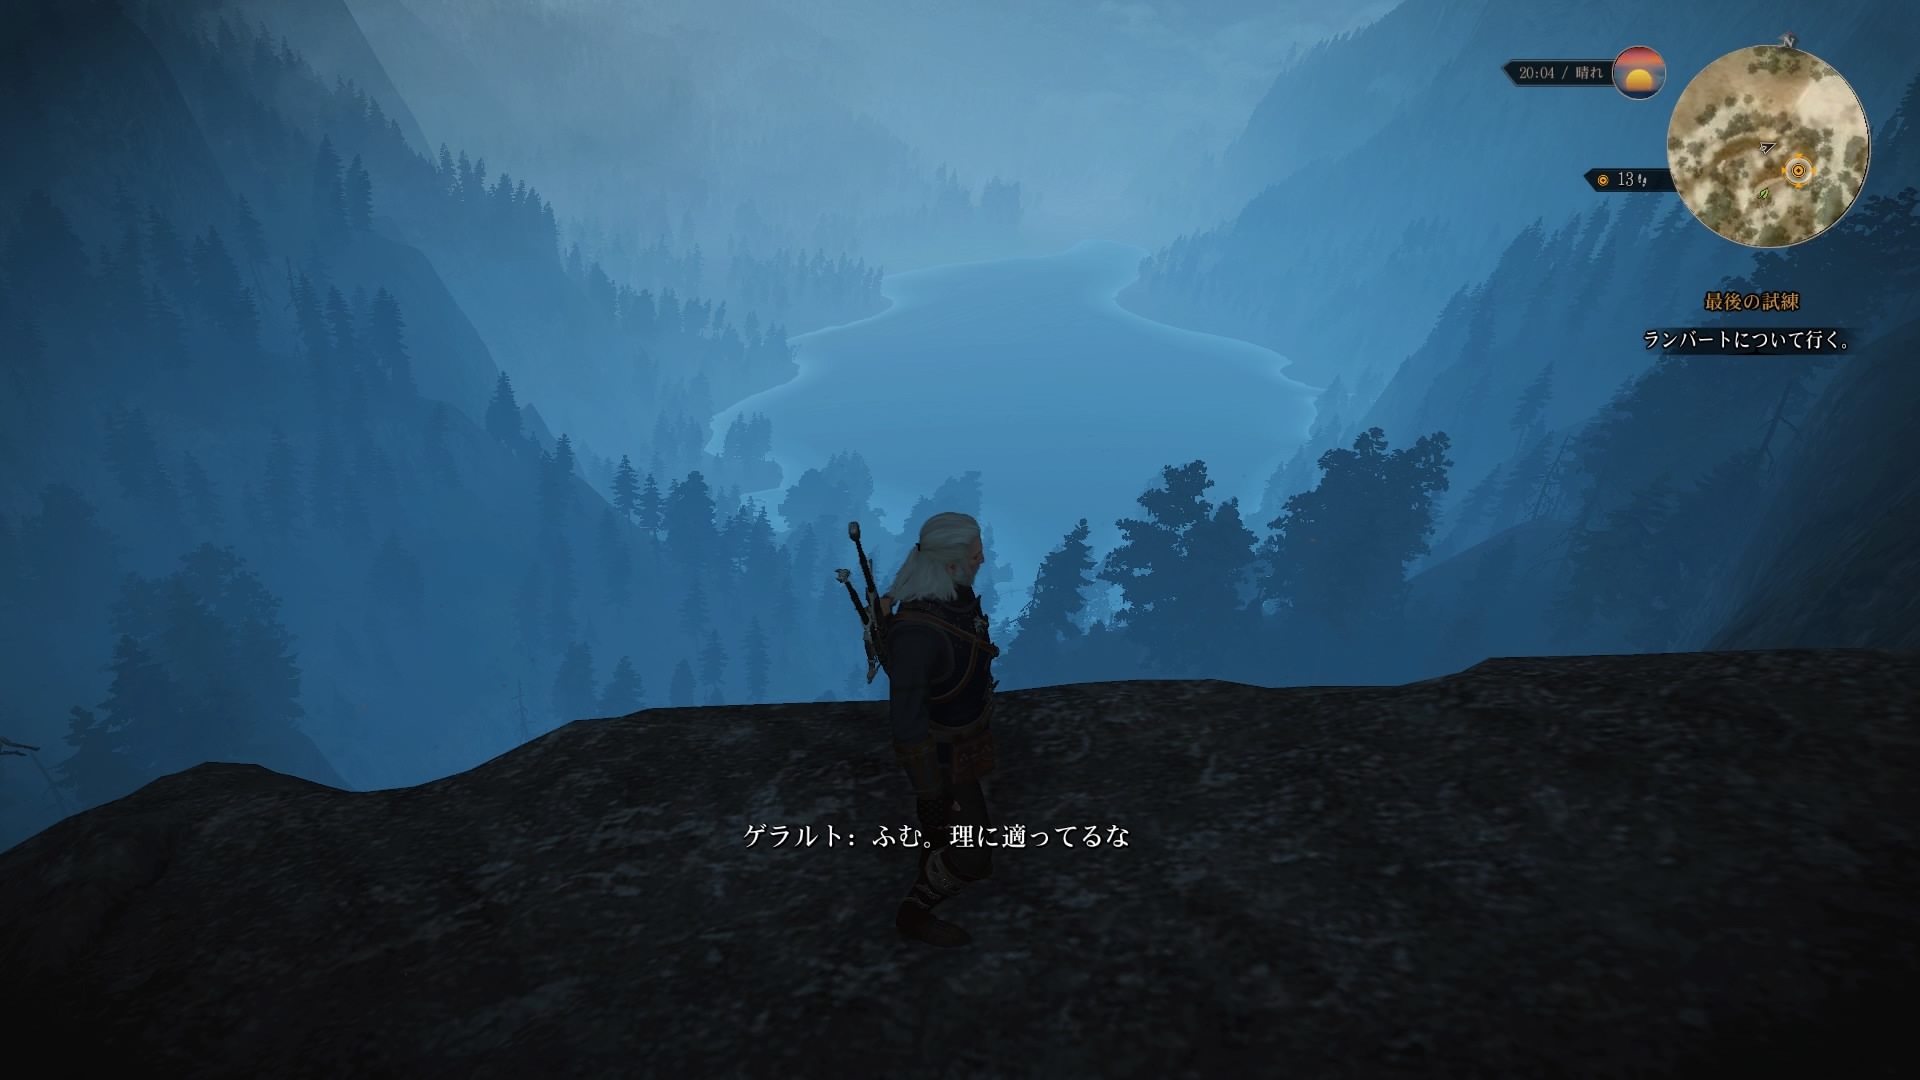 The Witcher 3 15 ケィア モルヘンに到着 The Witcher 3